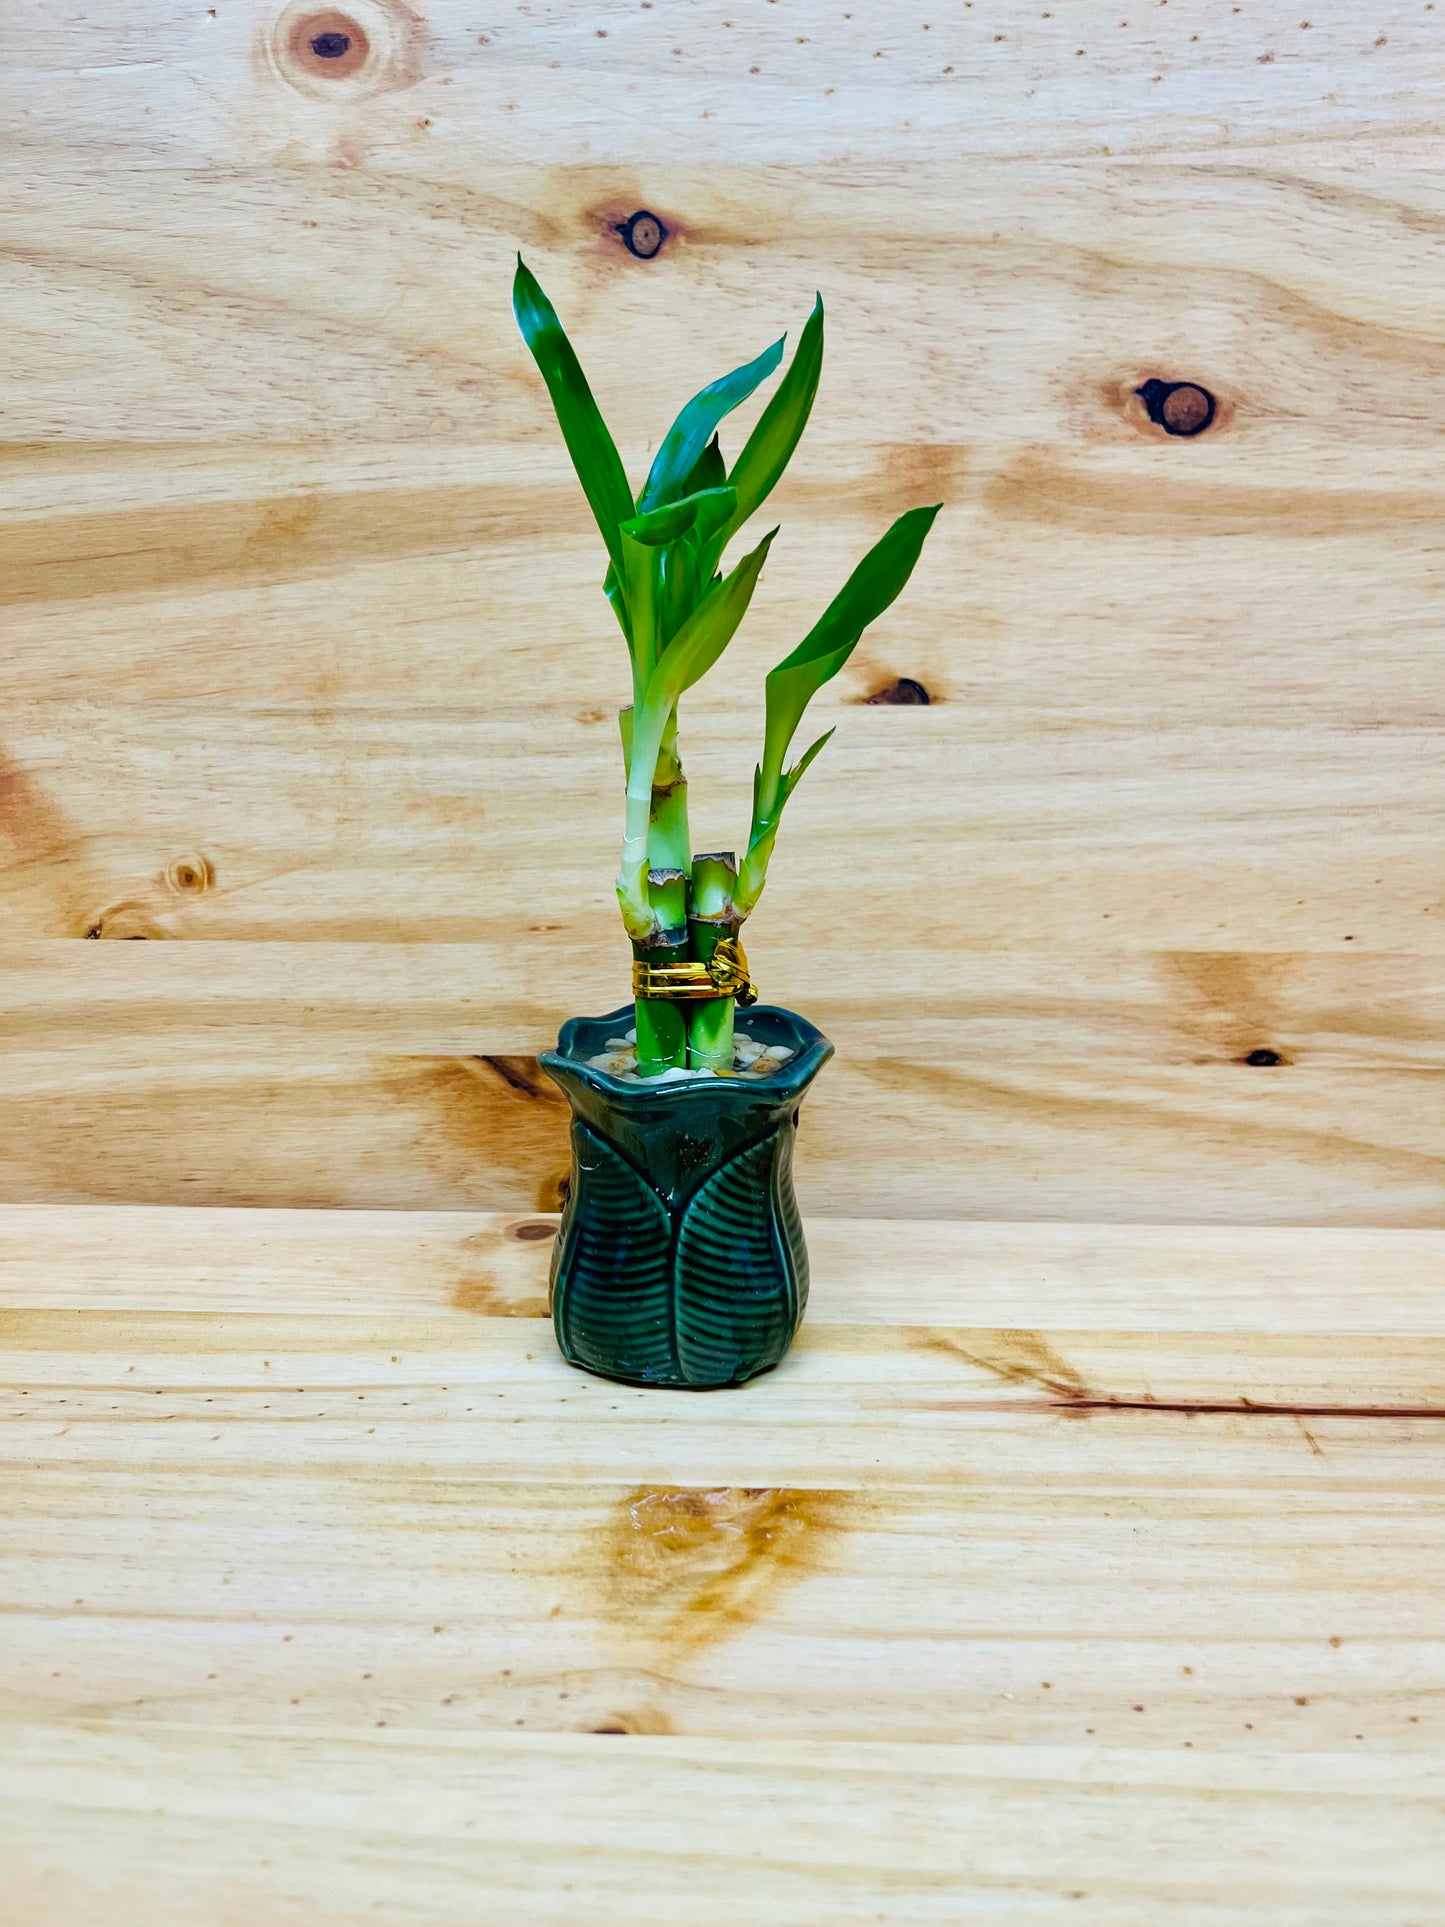 3 Pack Live Lucky Bamboo 4”4”6” Collection in Ceramic Vases